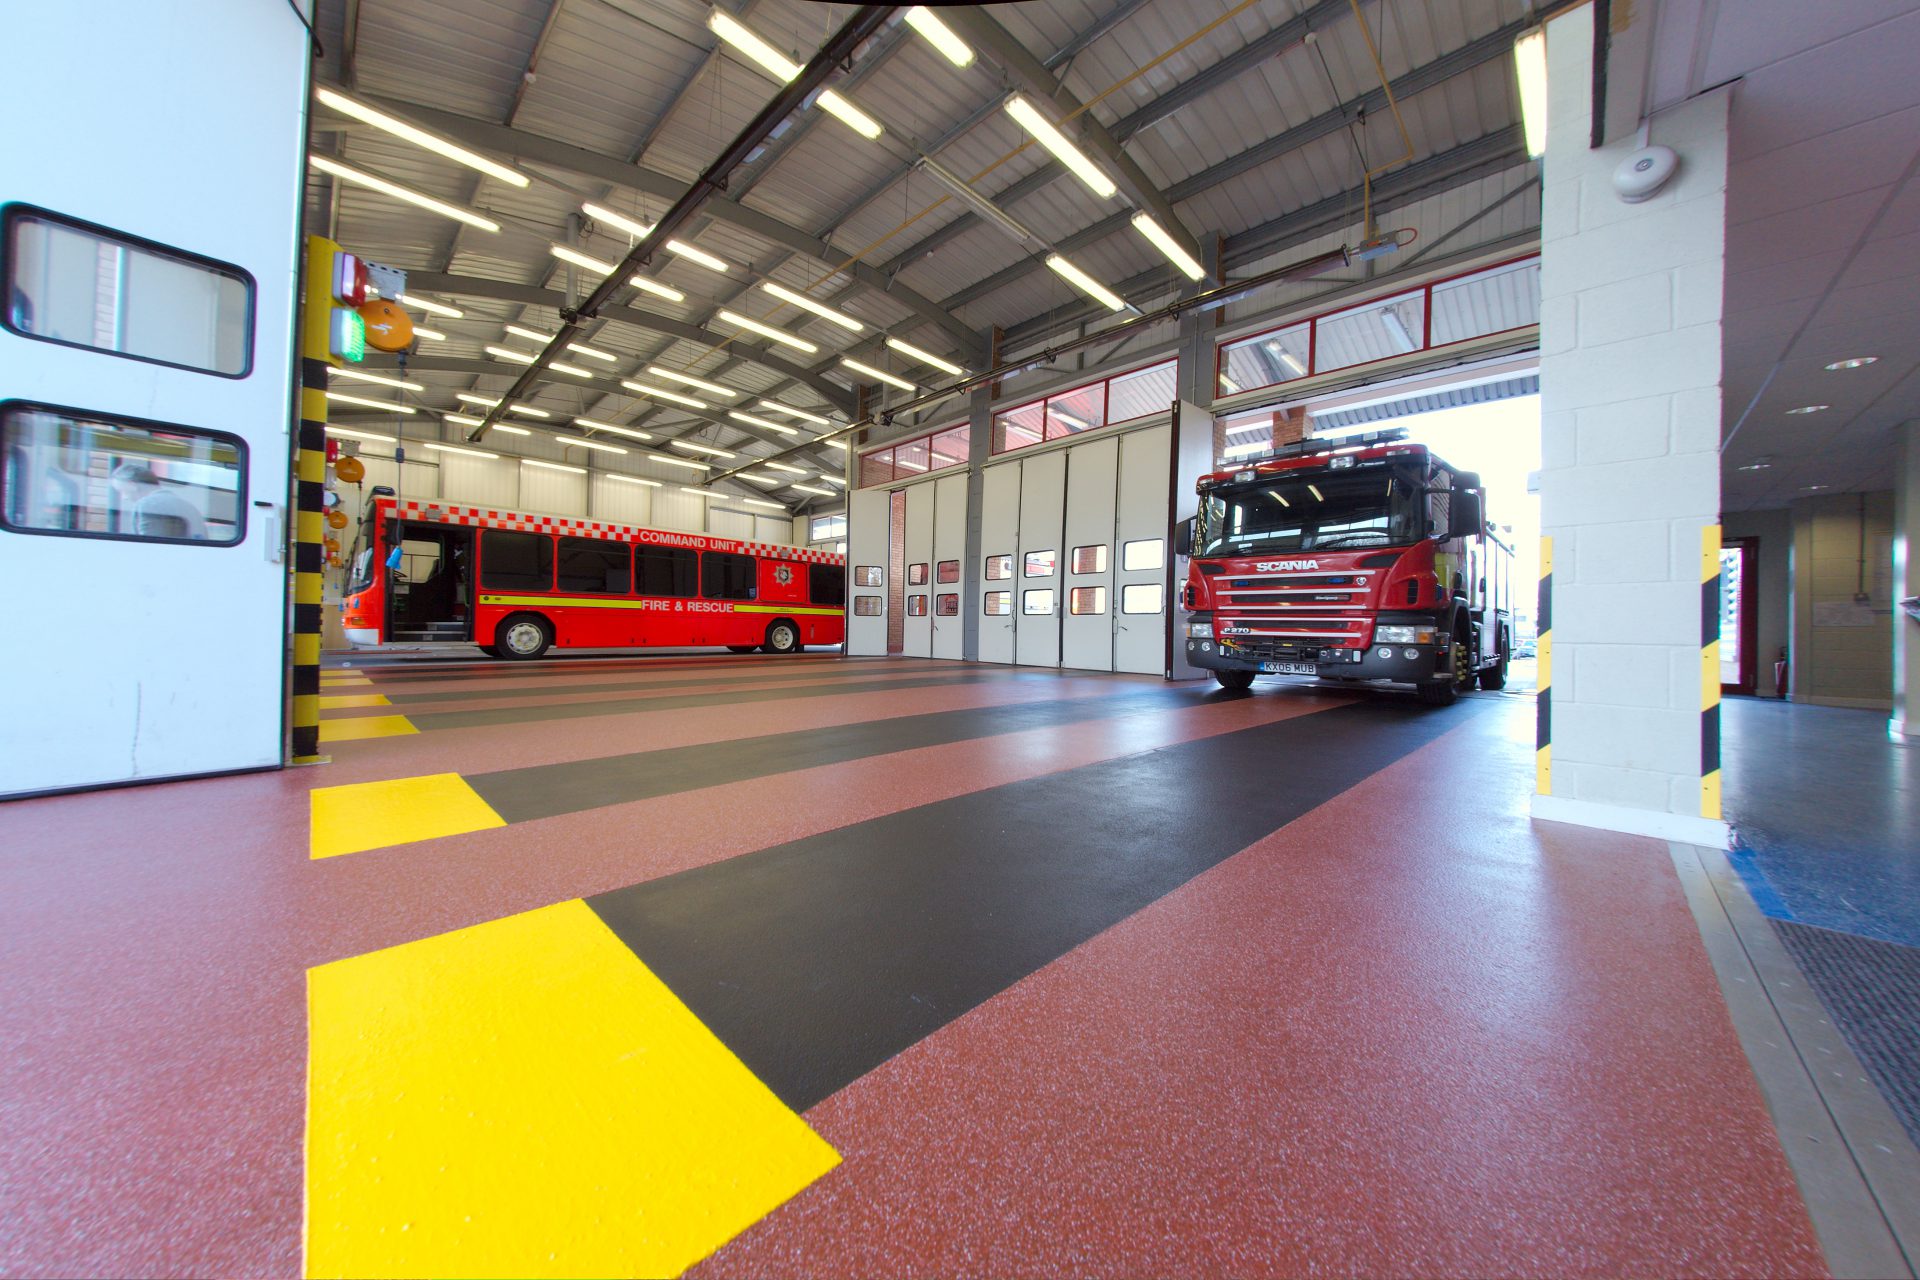 Fire station with red resin flooring and yellow and black bays-Resin Flooring Contractors- Ayslebury Fire Station